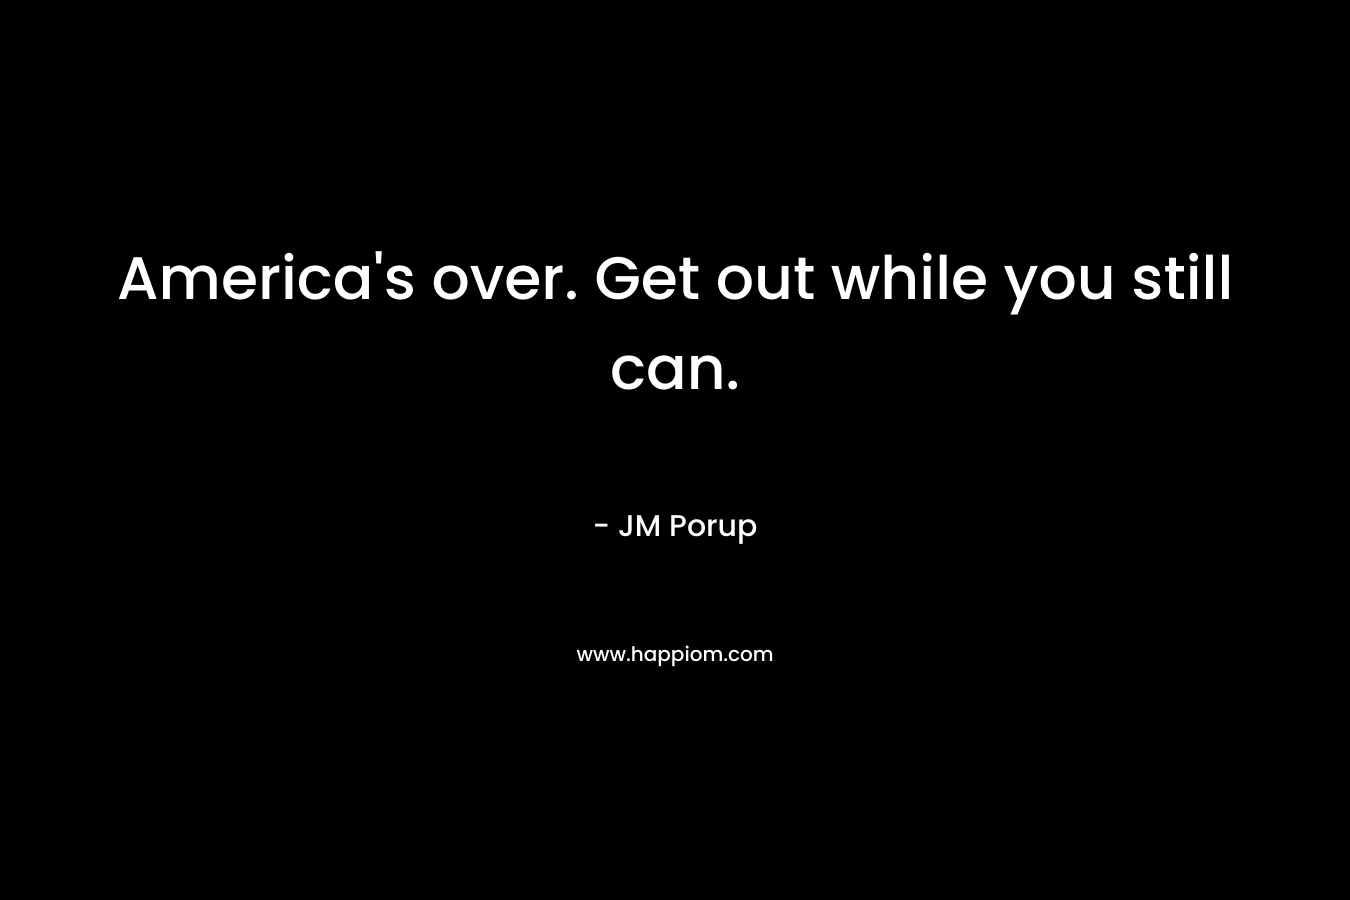 America’s over. Get out while you still can. – JM Porup